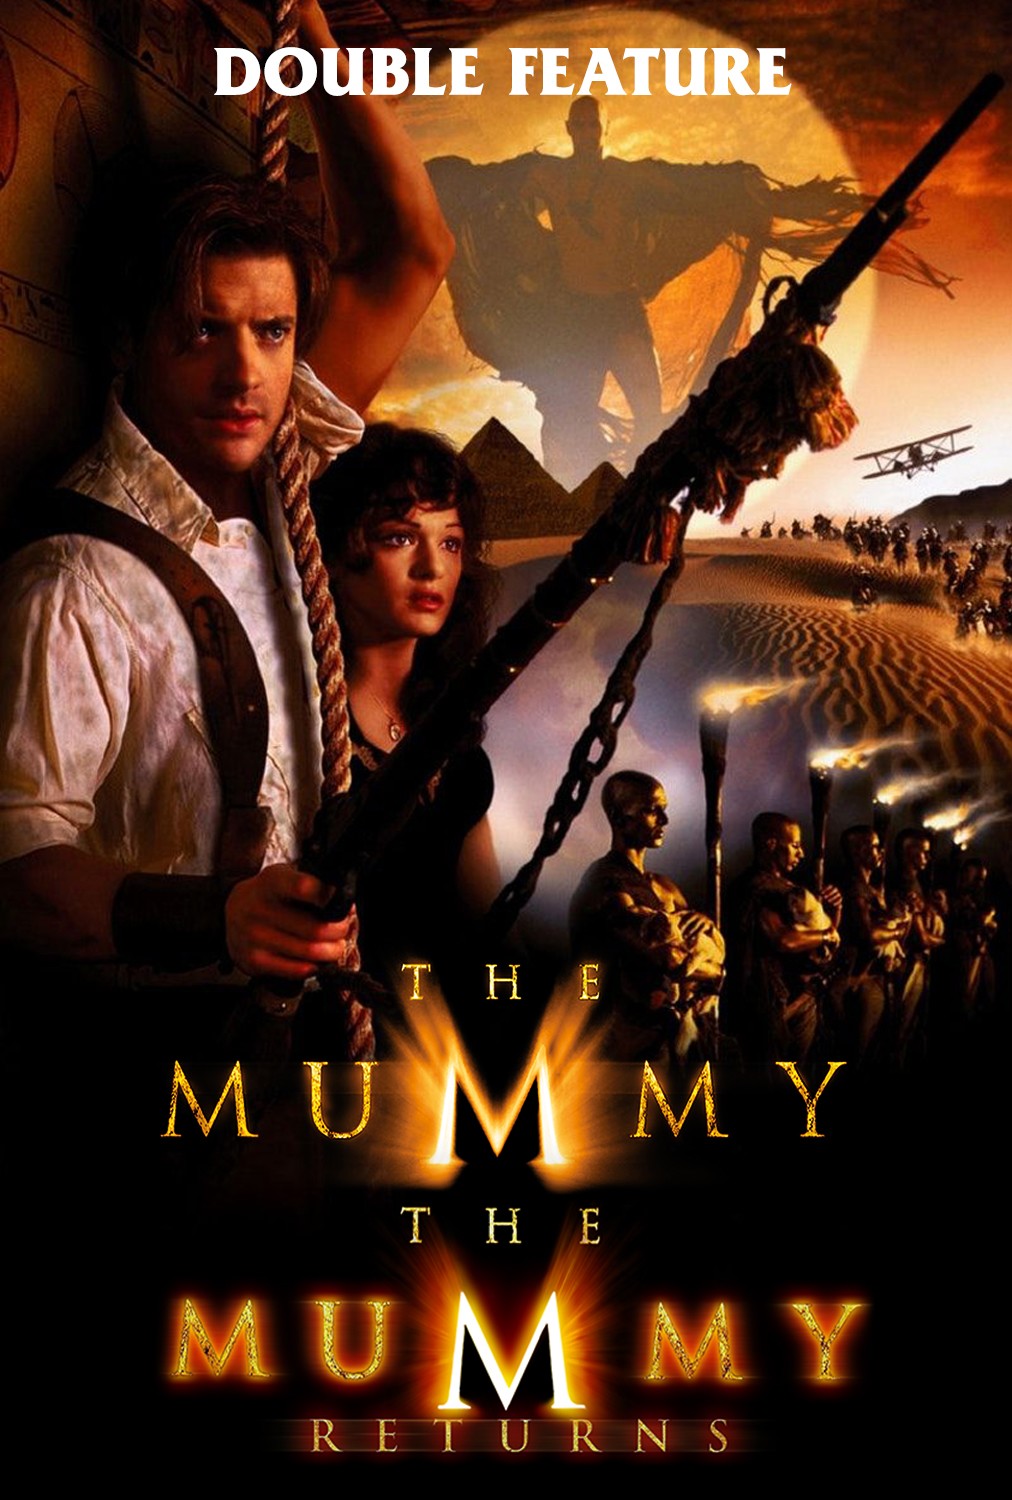 THE MUMMY - 35mm Double Feature